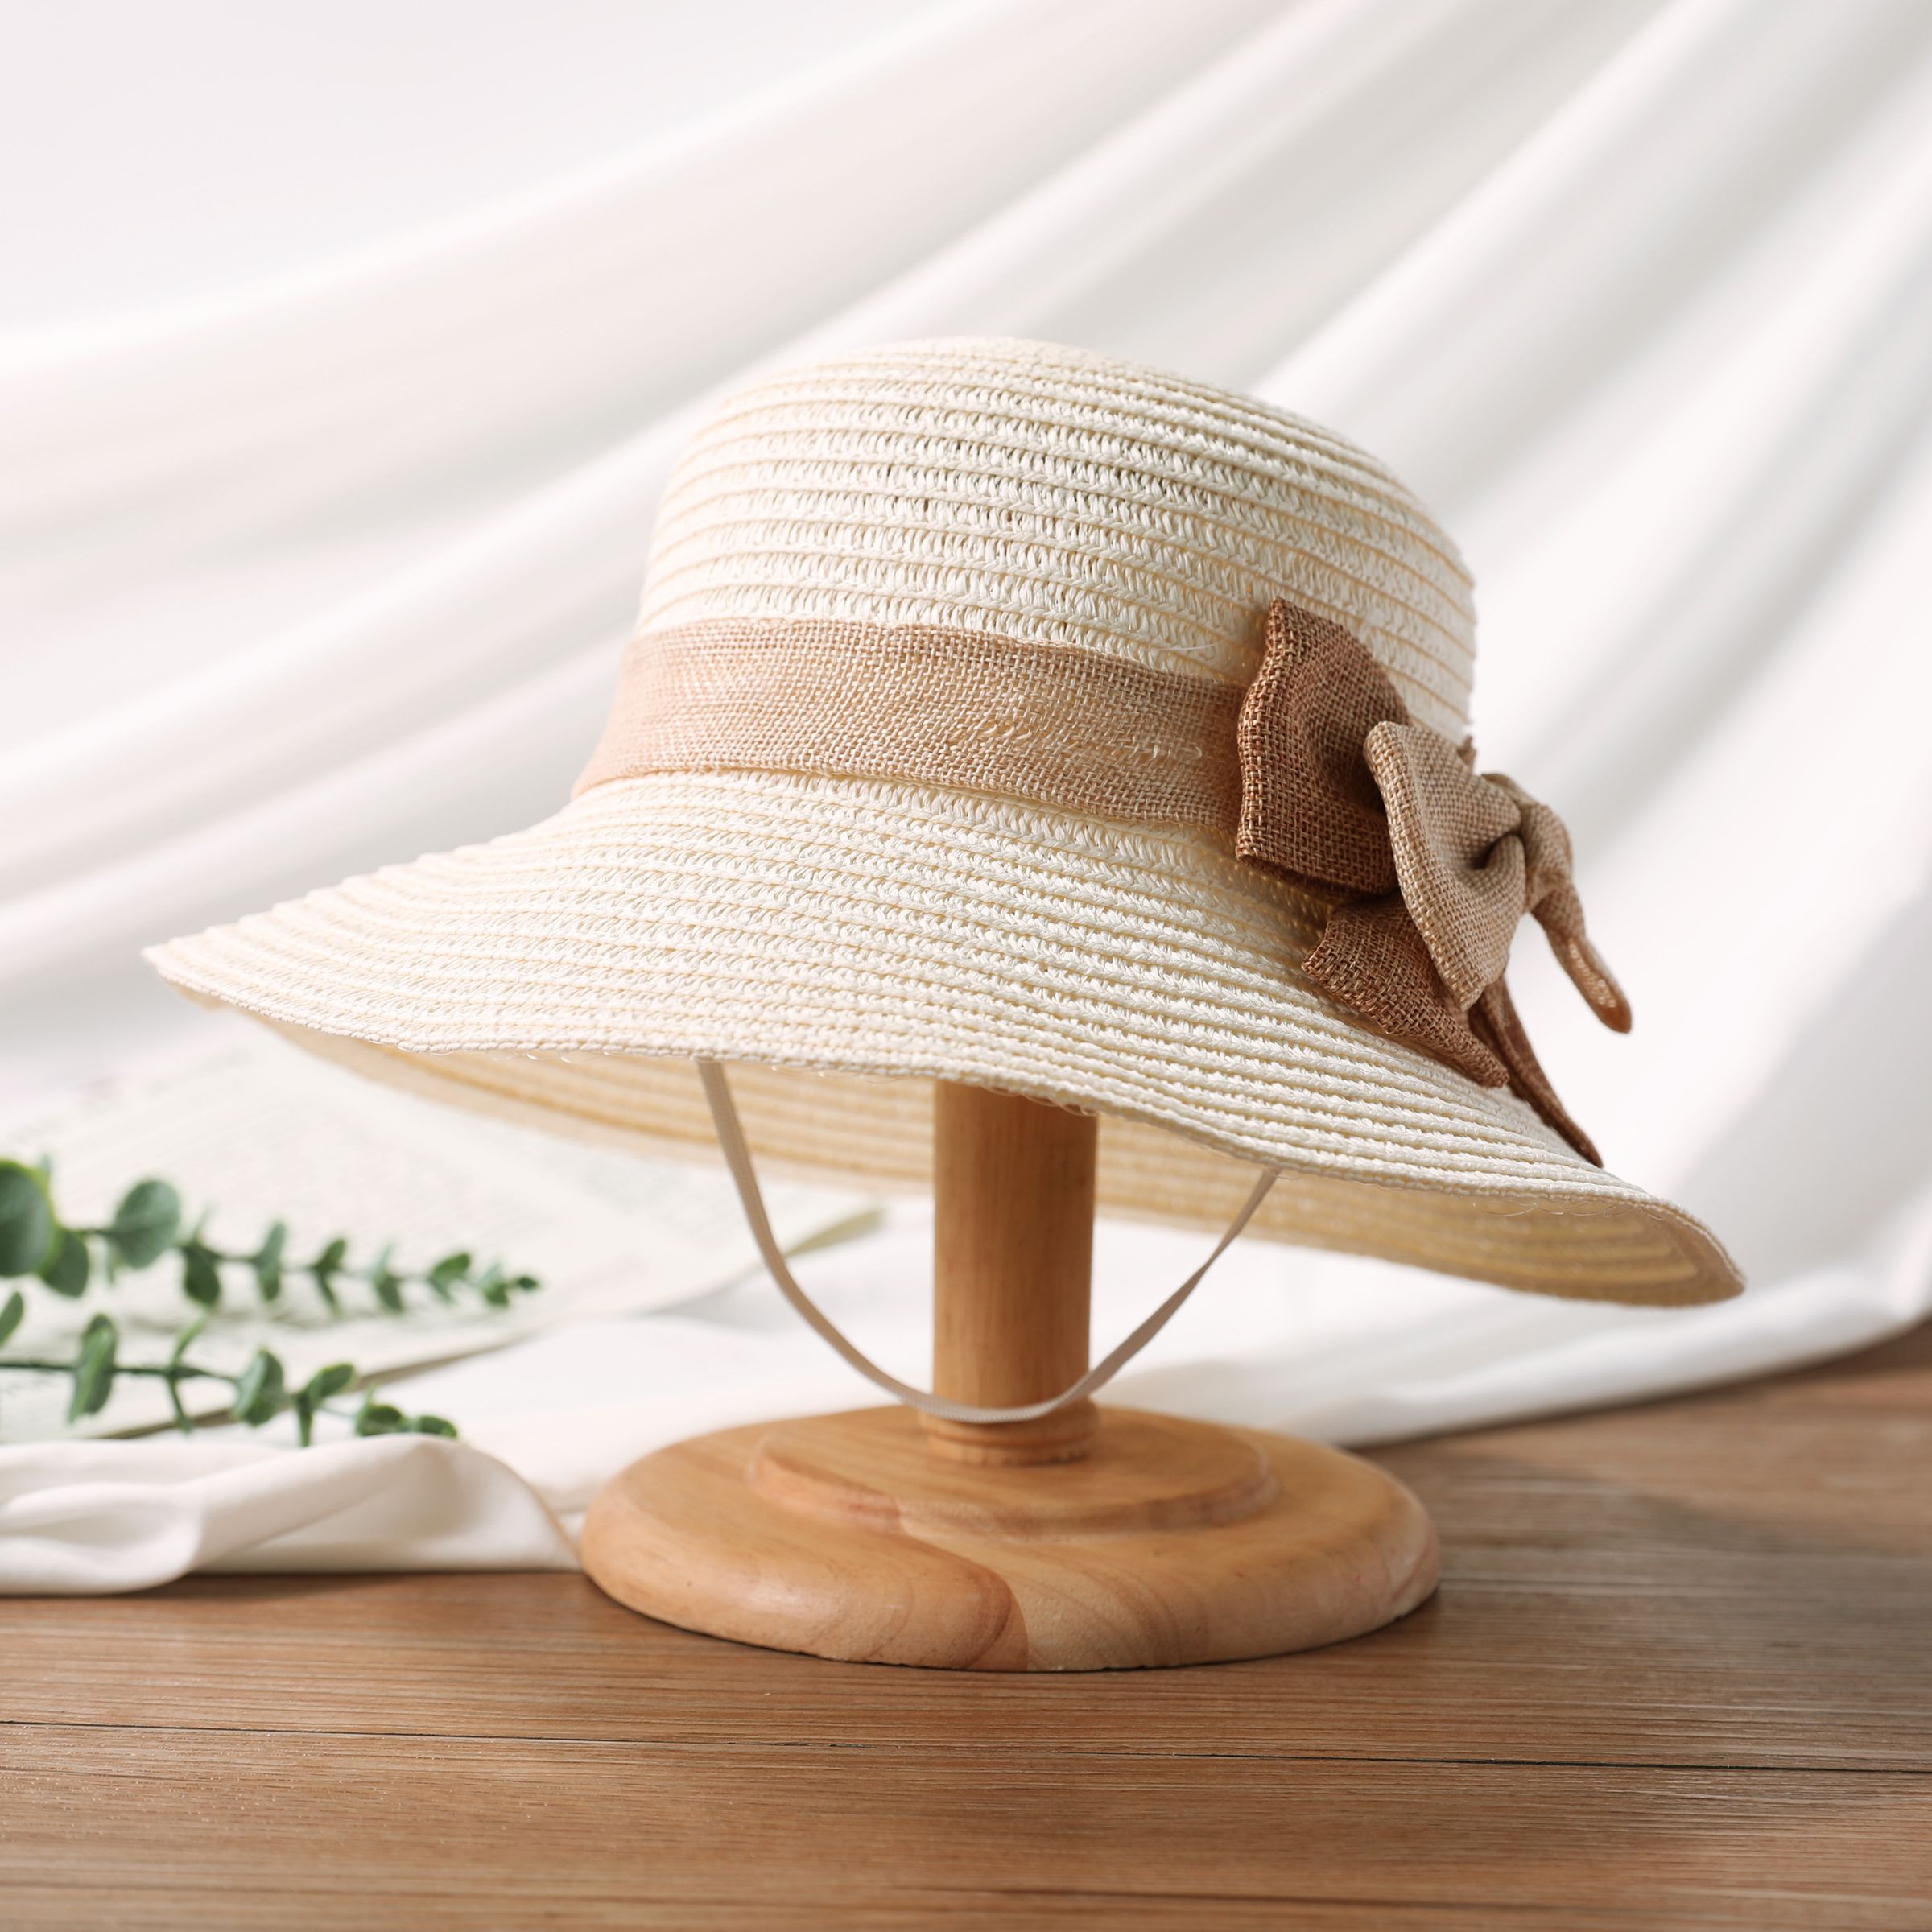 Summer Sun Hat for Girls with Bowknot and Rolled Brim, Straw Beach Hat for Travel and Vacation